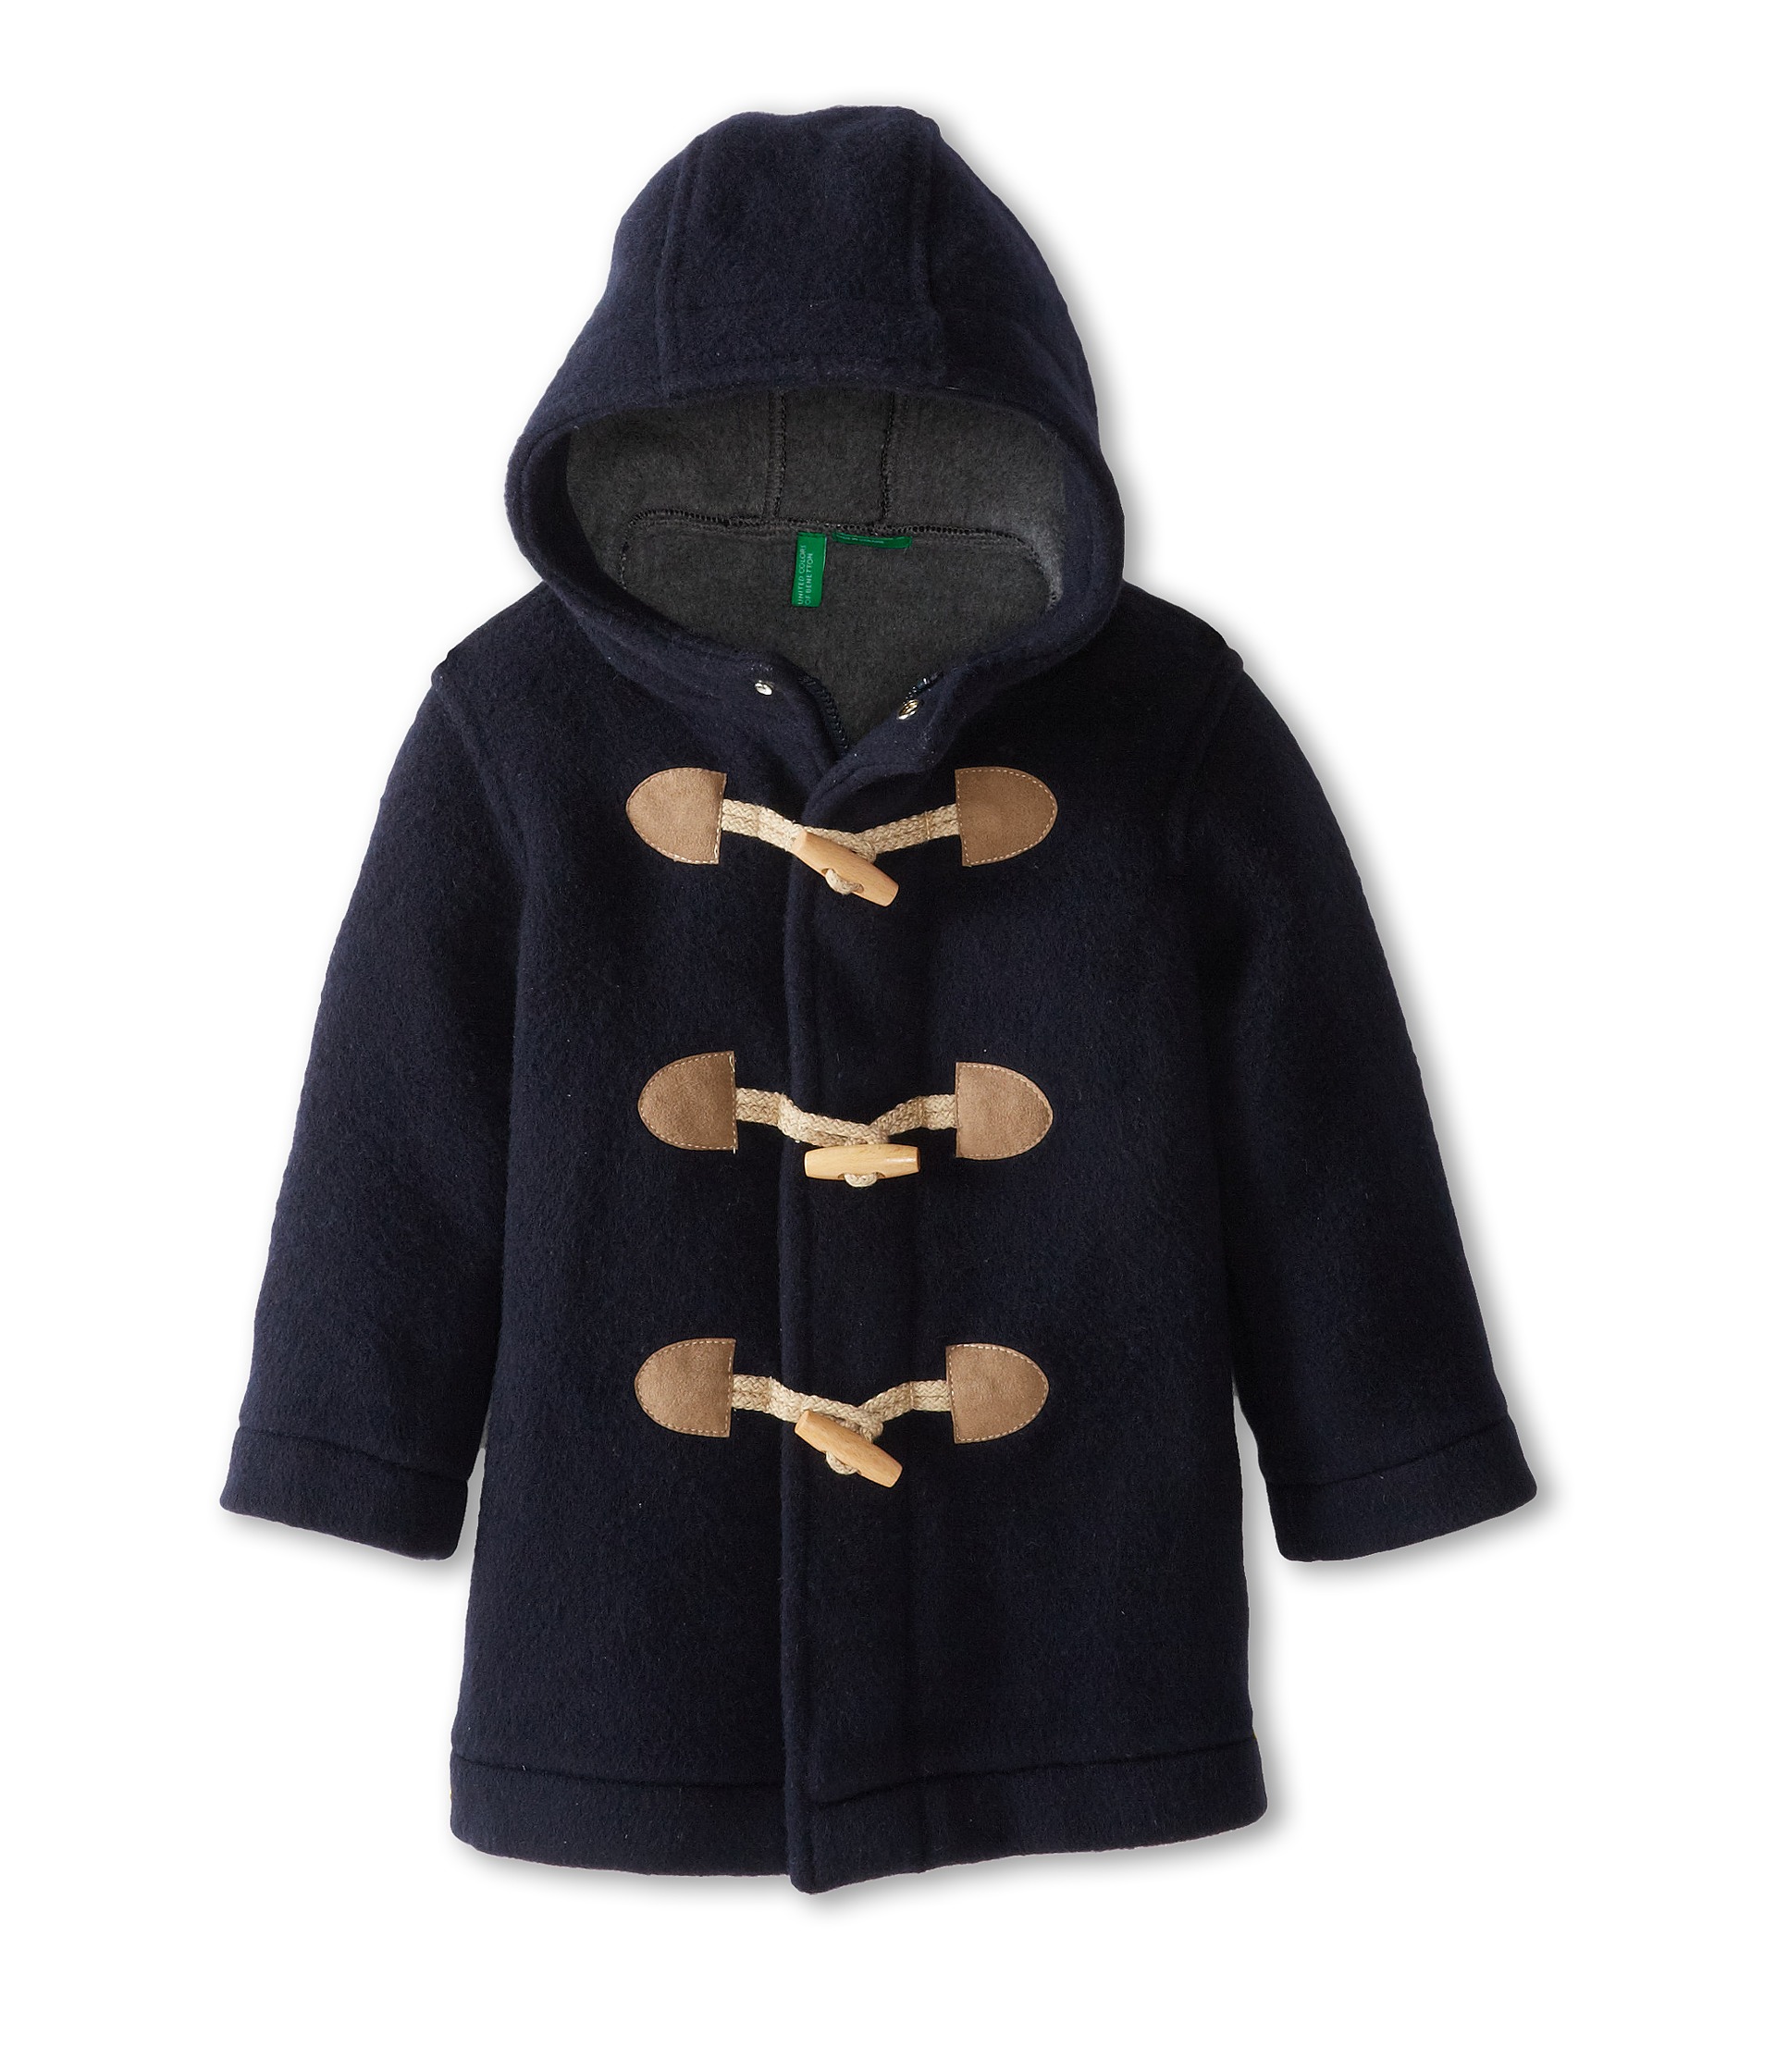 United Colors Of Benetton Kids Wool Toggle Coat Toddler Navy | Shipped ...